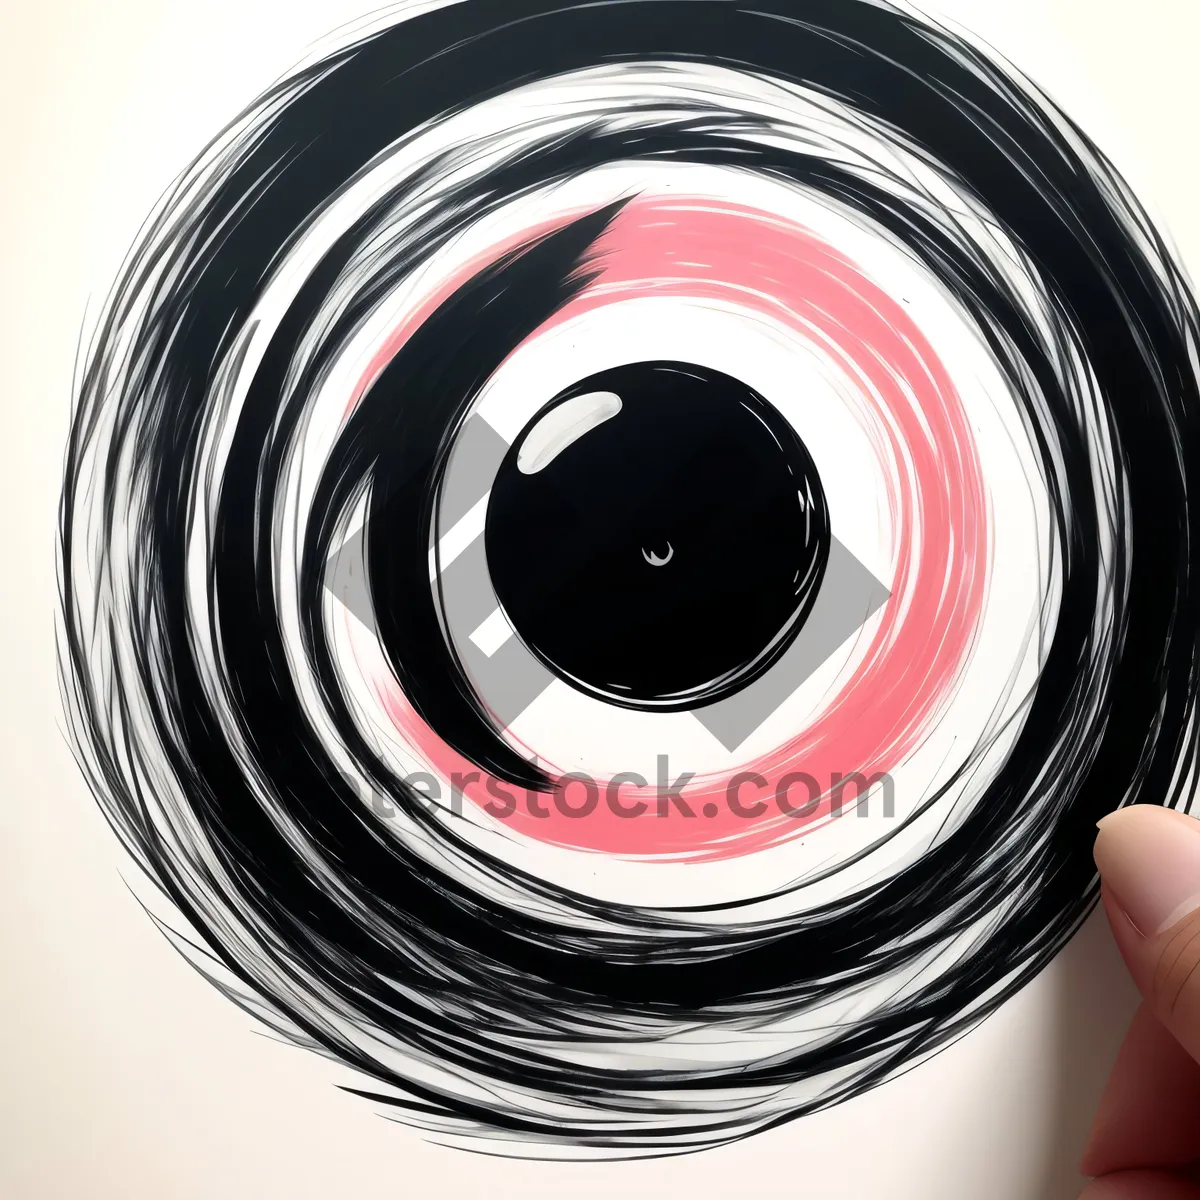 Picture of Reflective Disk: Capturing Liquid Motion with Aperture Lens